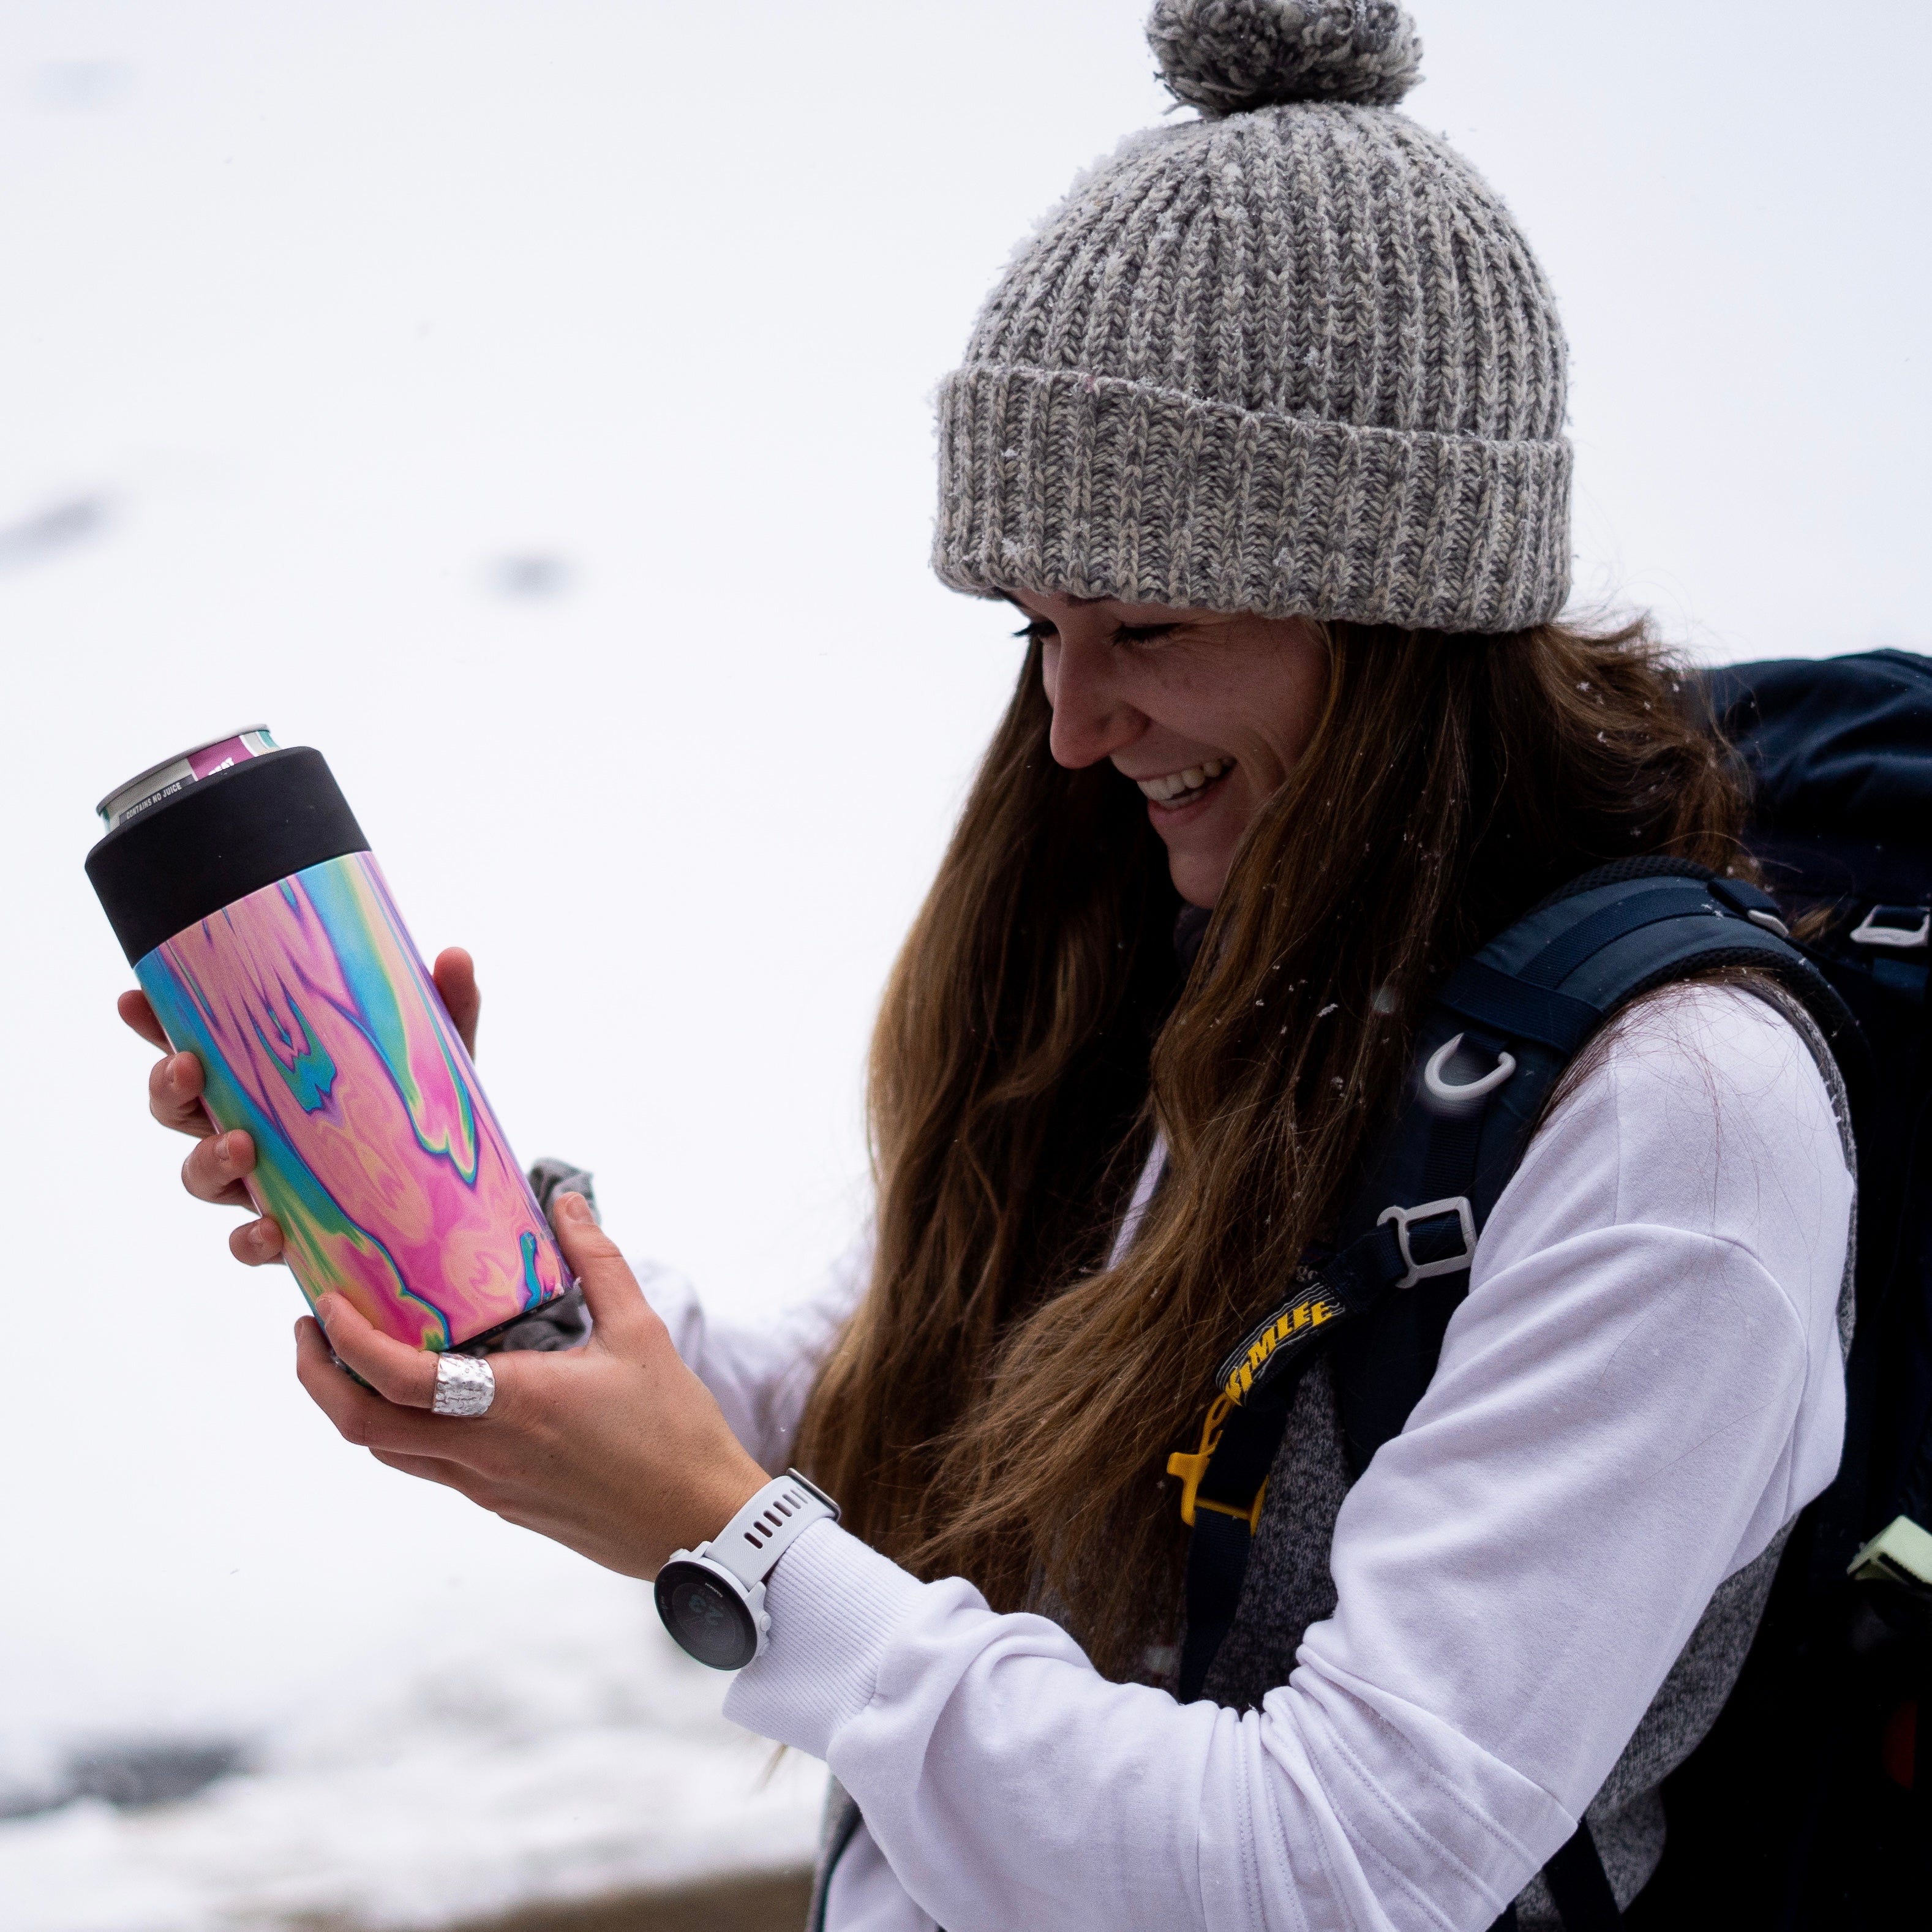 Frost Buddy® Universal Buddy 2.0 Review! 🧊🥤💯, Can Cooler Review!